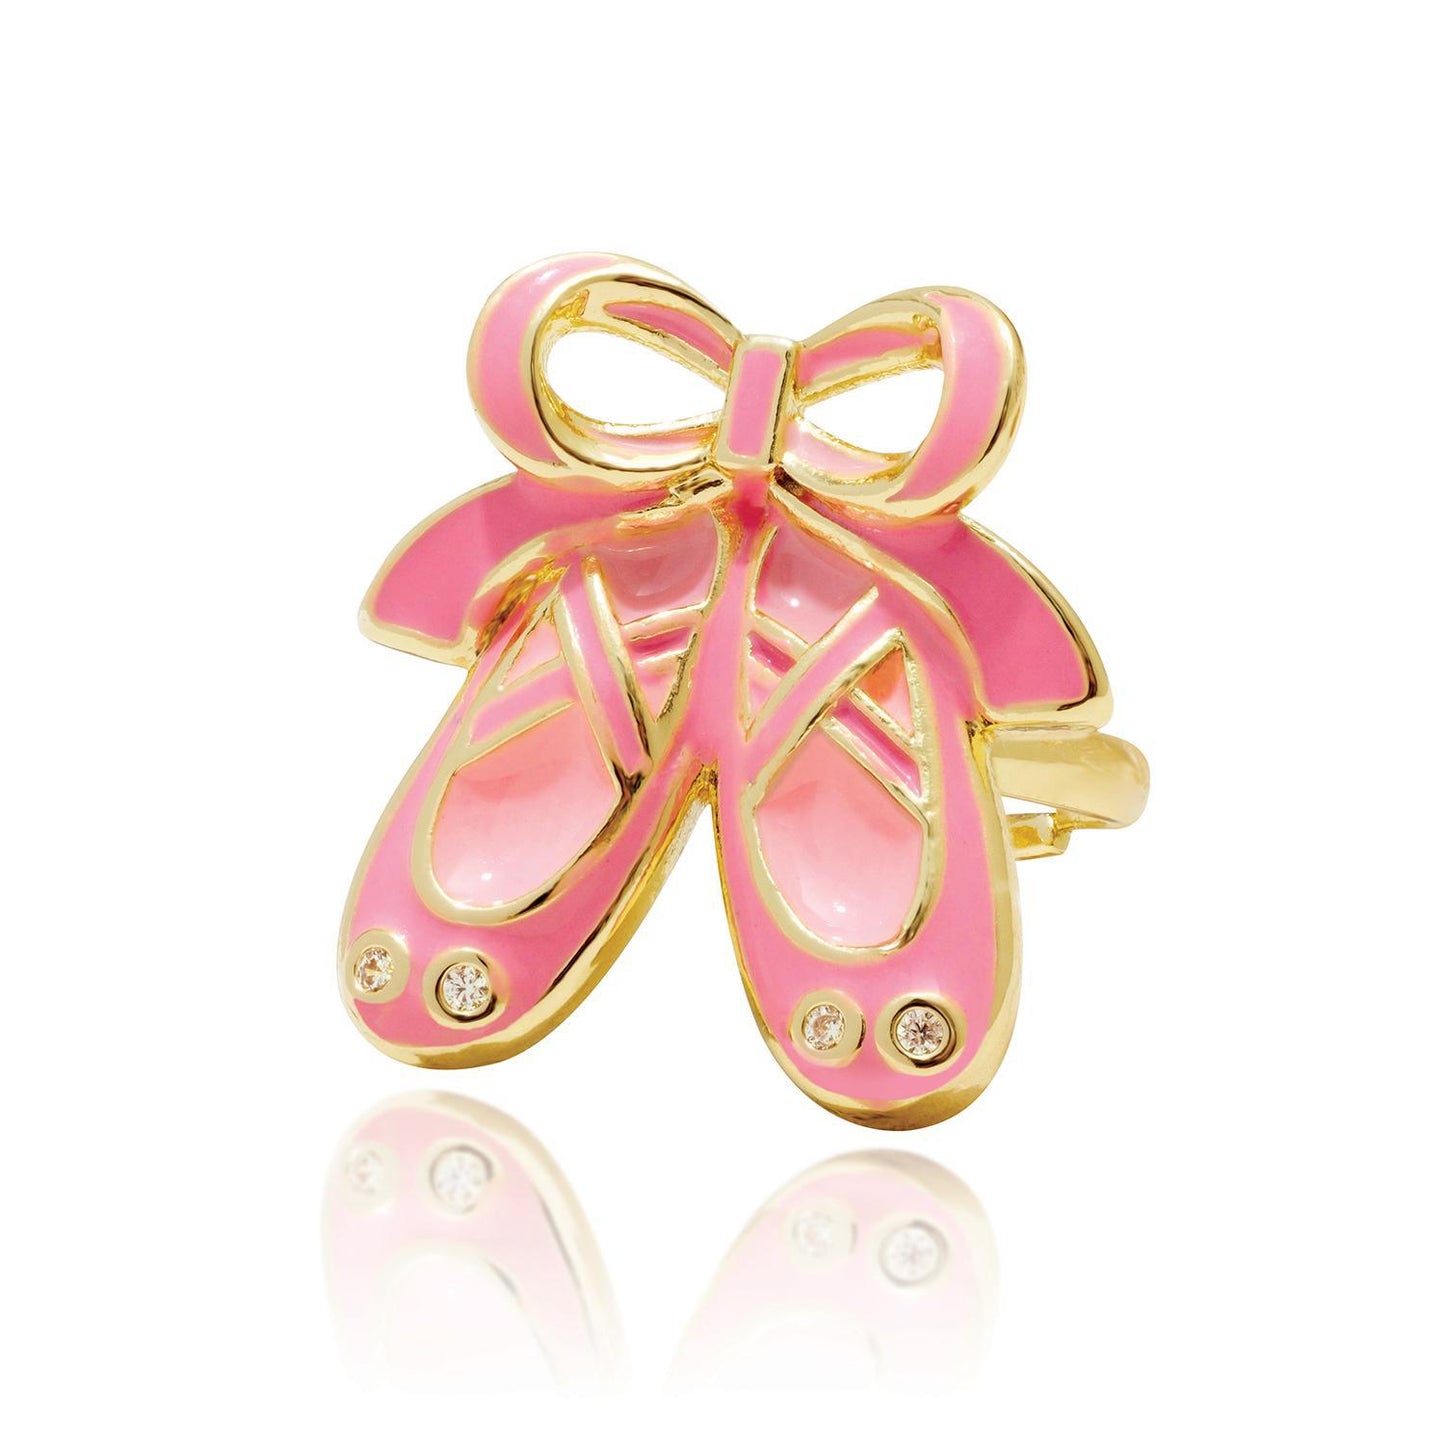 Twinkle Toes Adjustable Ring w/ Gift Box